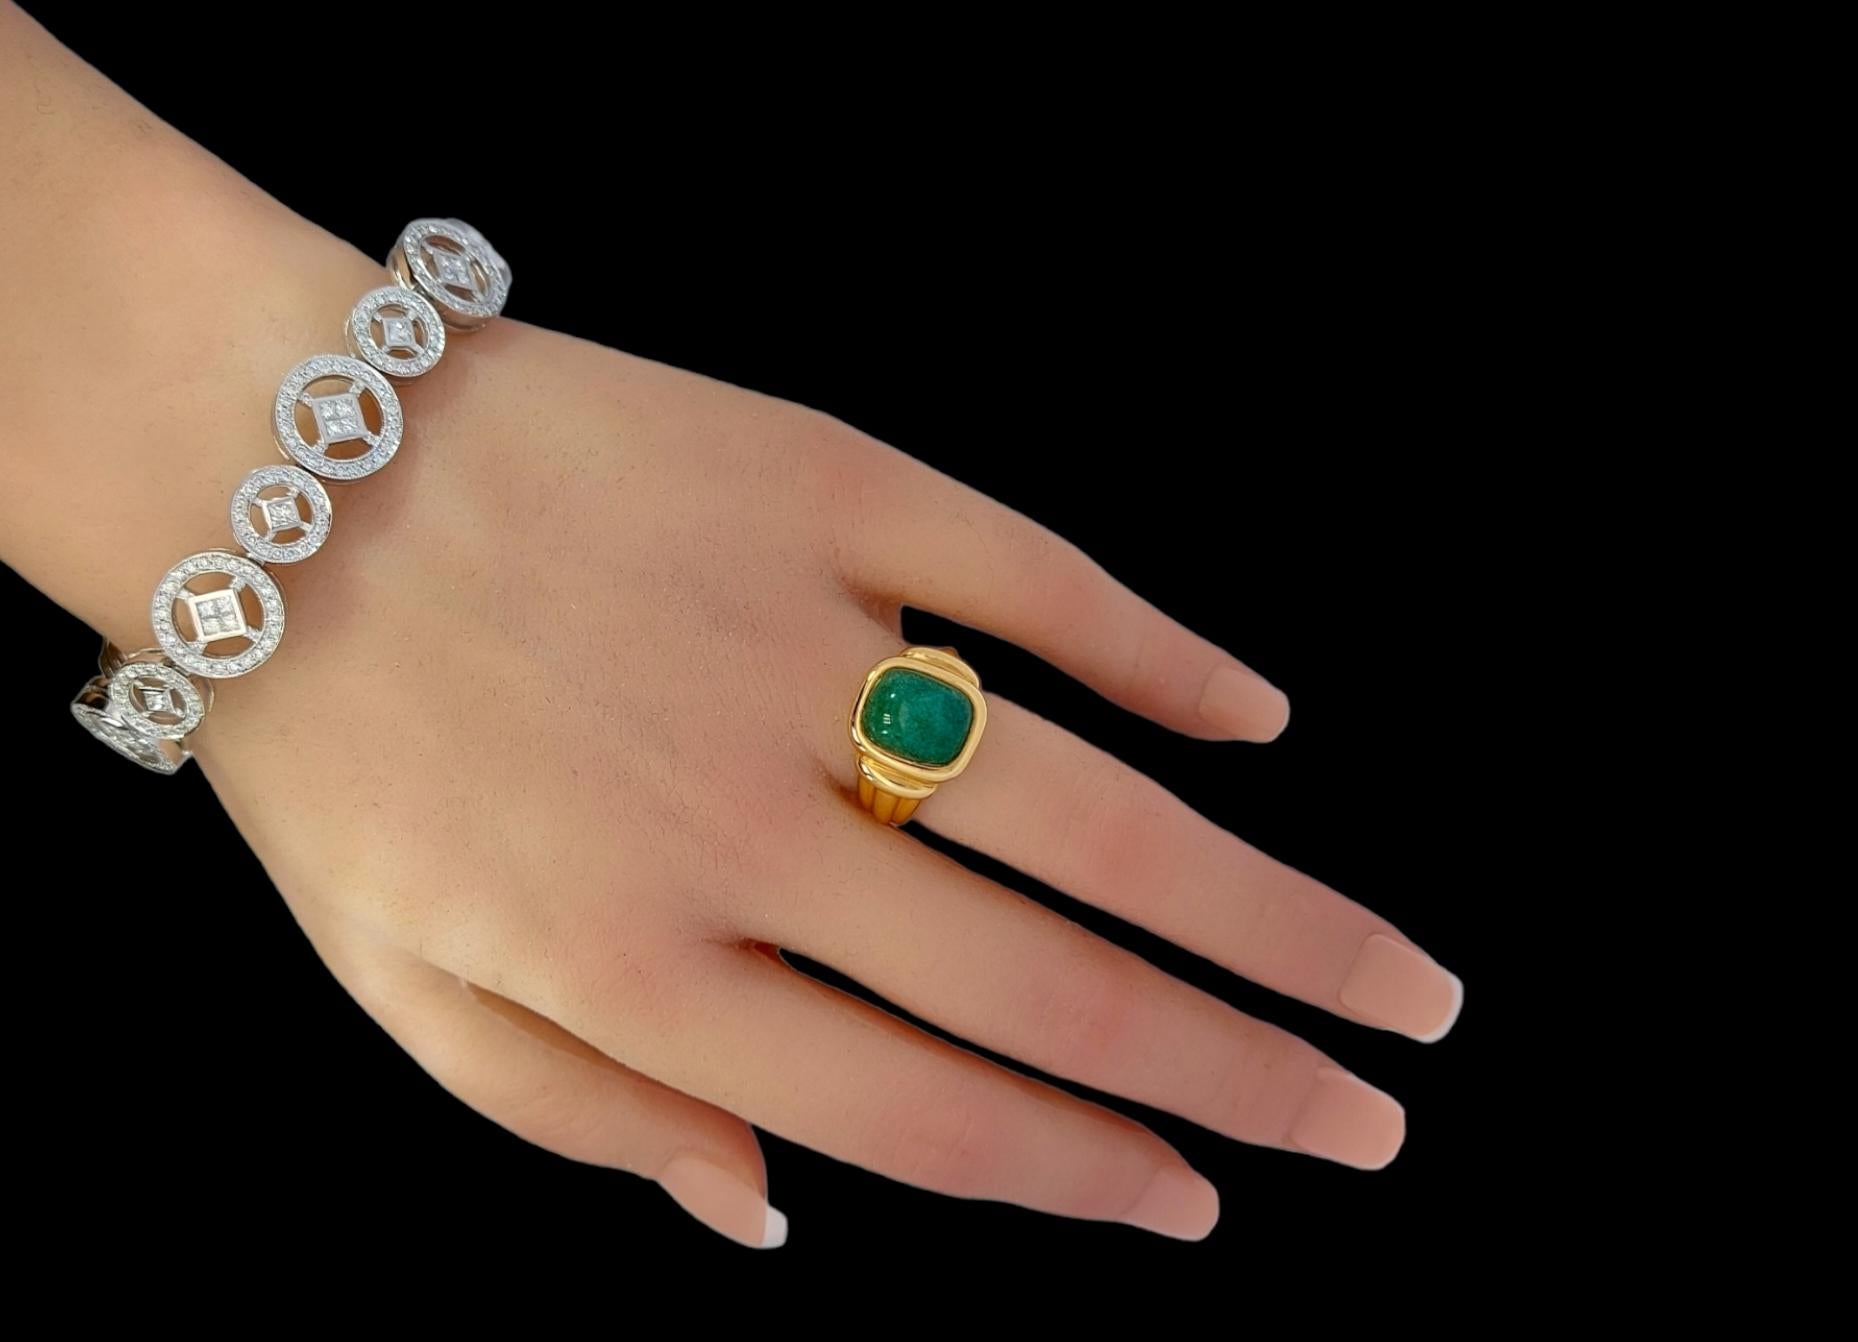 Hermès Paris 18kt Yellow Gold Ring with Cabochon Jade Stone 2